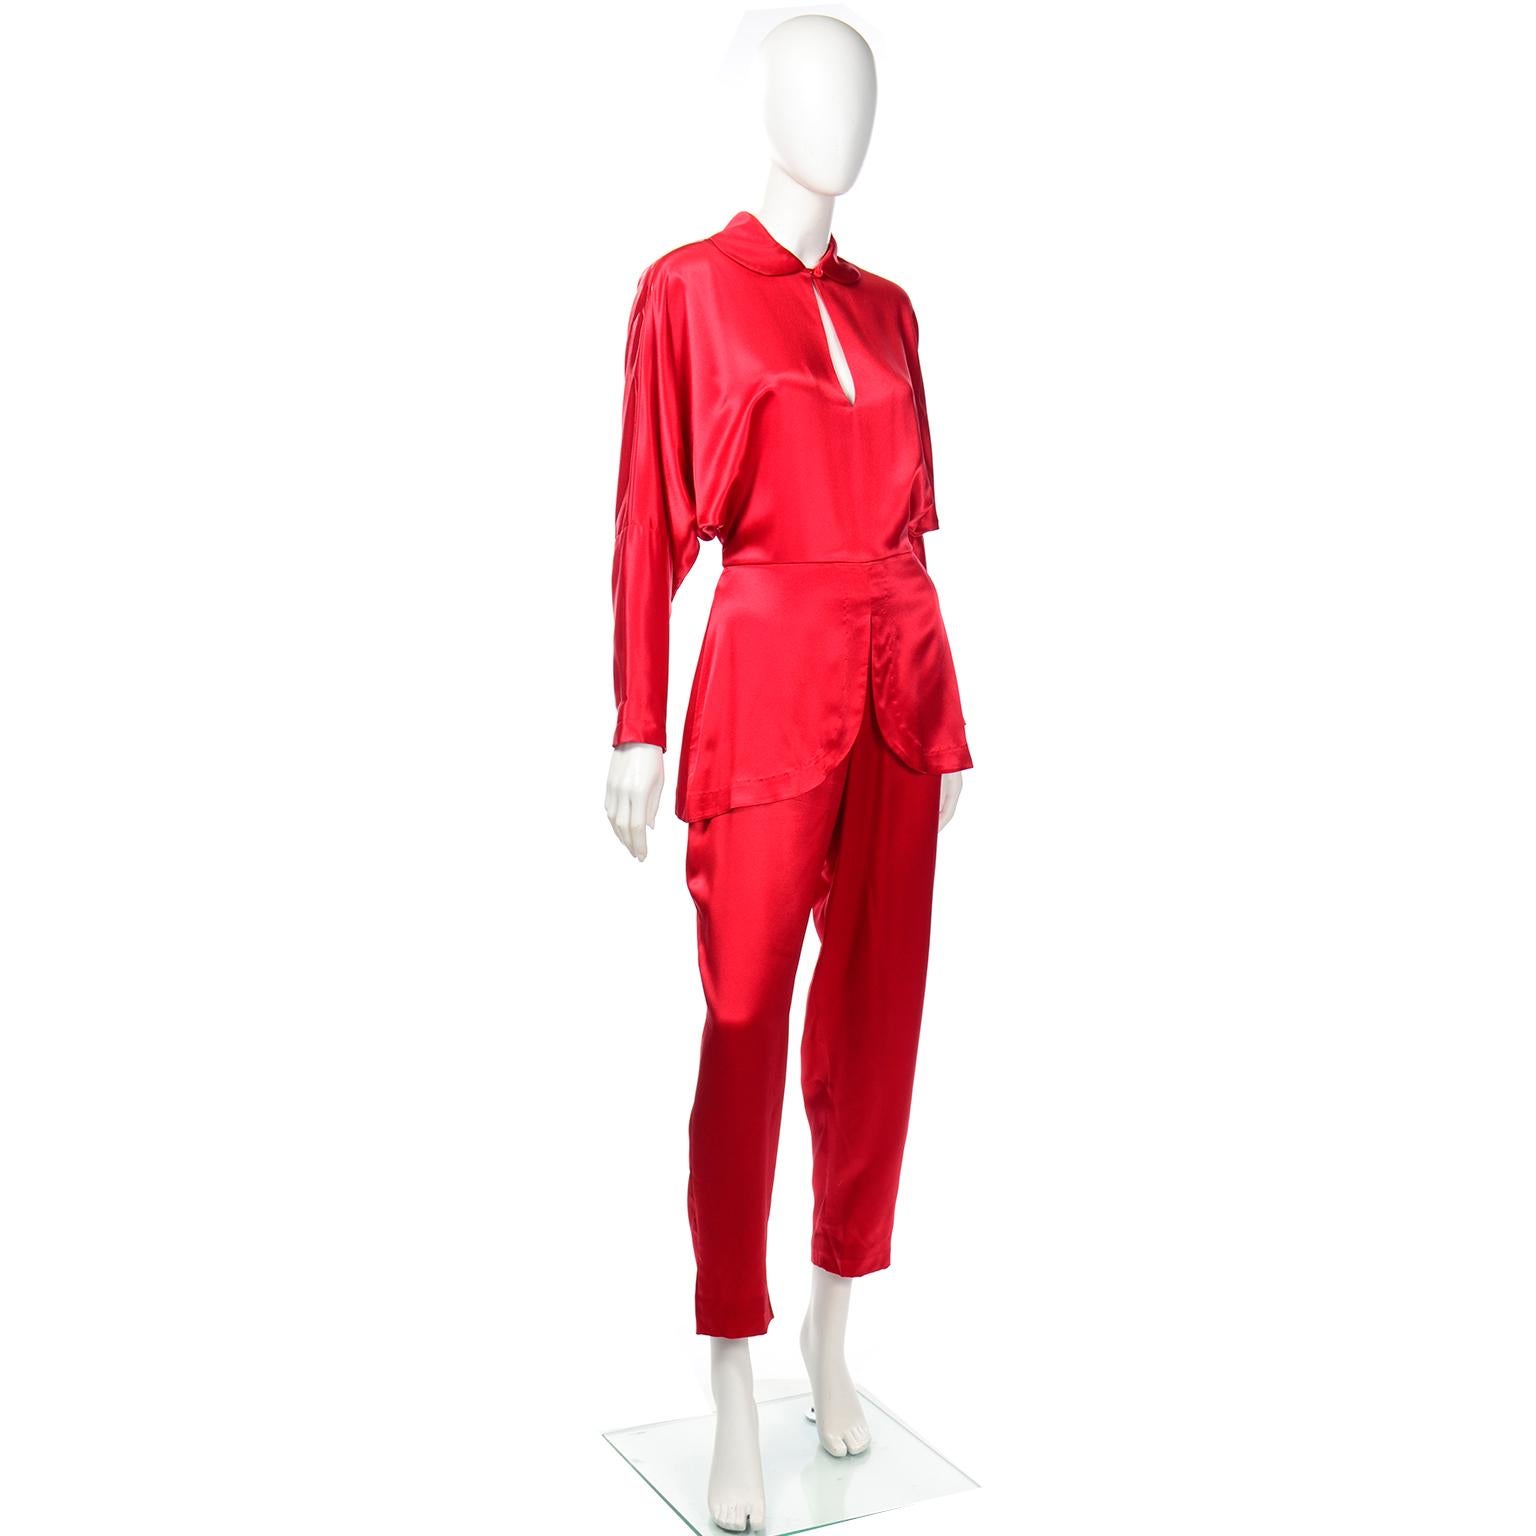 Vintage Norma Kamali 1980s Red Satin One Piece Jumpsuit In Good Condition For Sale In Portland, OR